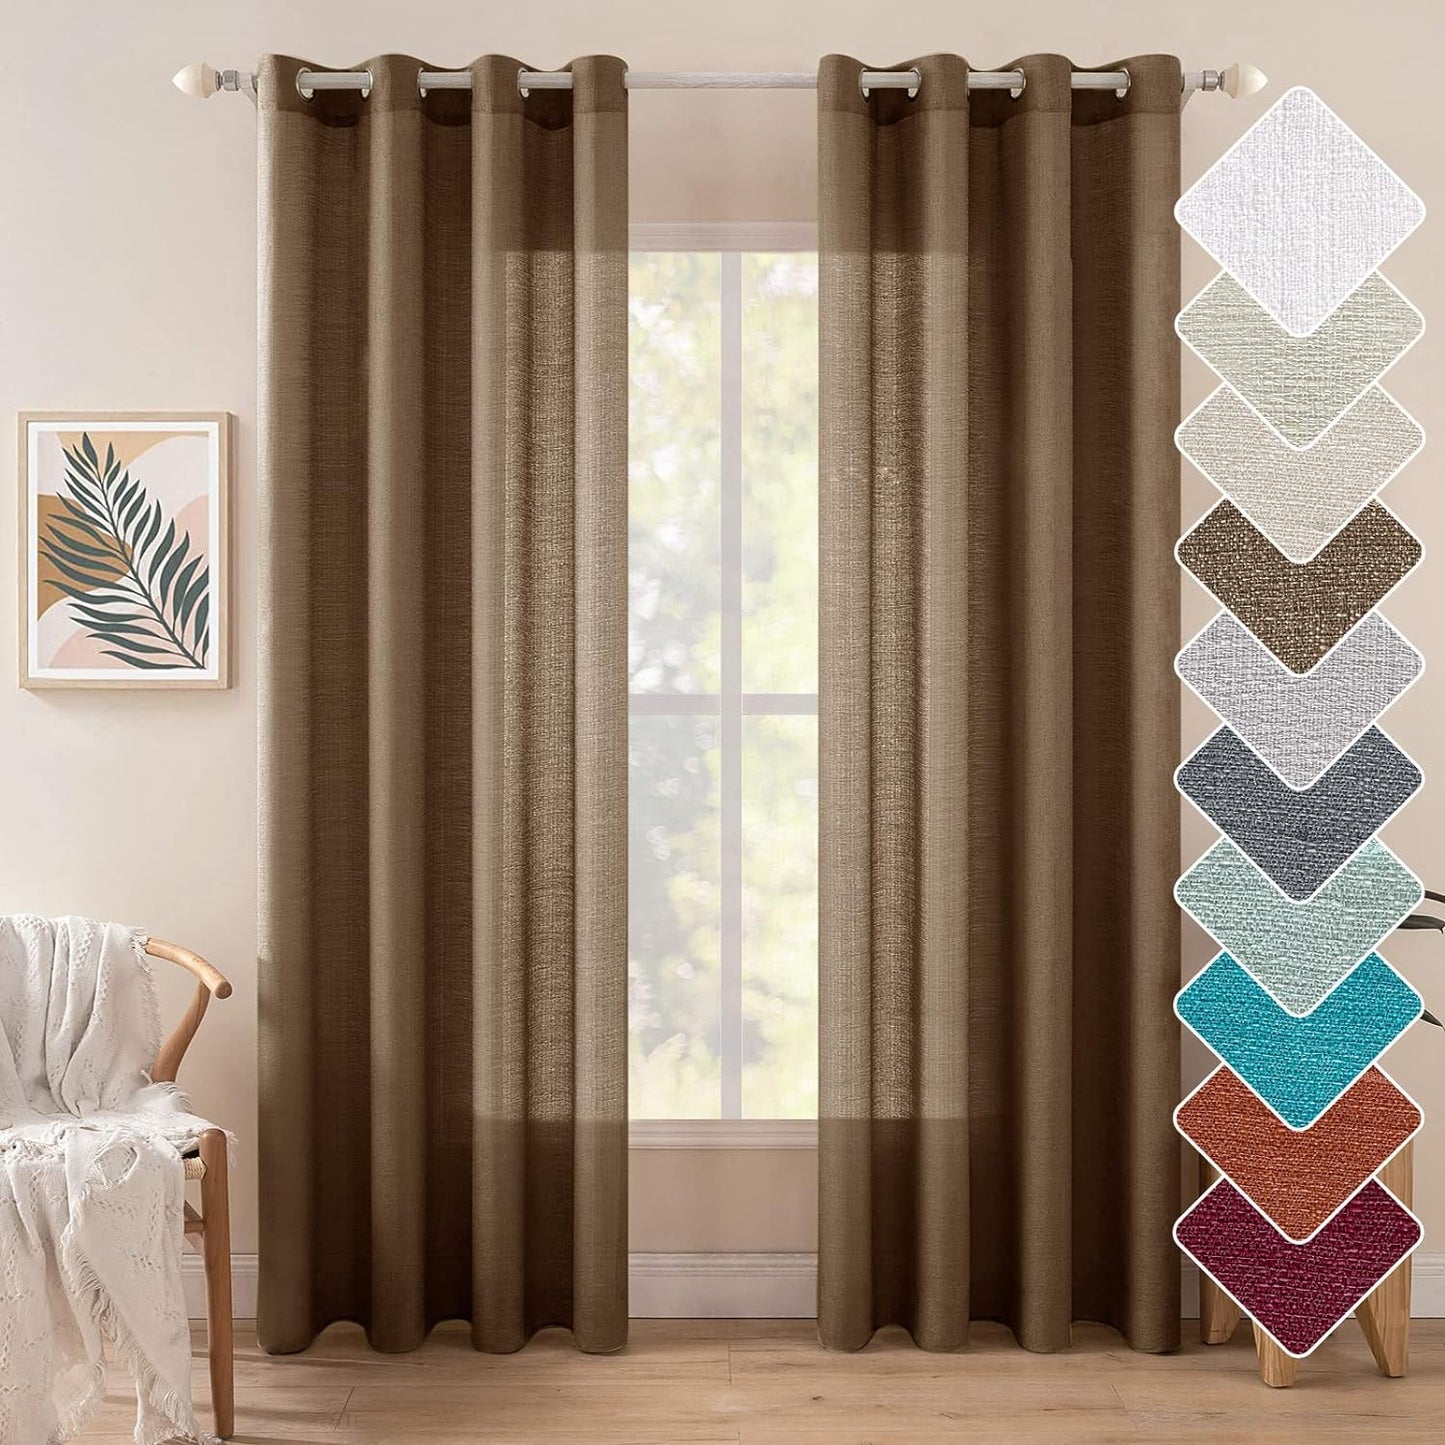 MIULEE Burnt Orange Linen Semi Sheer Curtains 2 Panels for Living Room Bedroom Linen Textured Light Filtering Privacy Window Curtains Terracotta Grommet Drapes Rust Boho Fall Decor W 52 X L 84 Inches  MIULEE Grommet | Chocolate Brown W52 X L84 